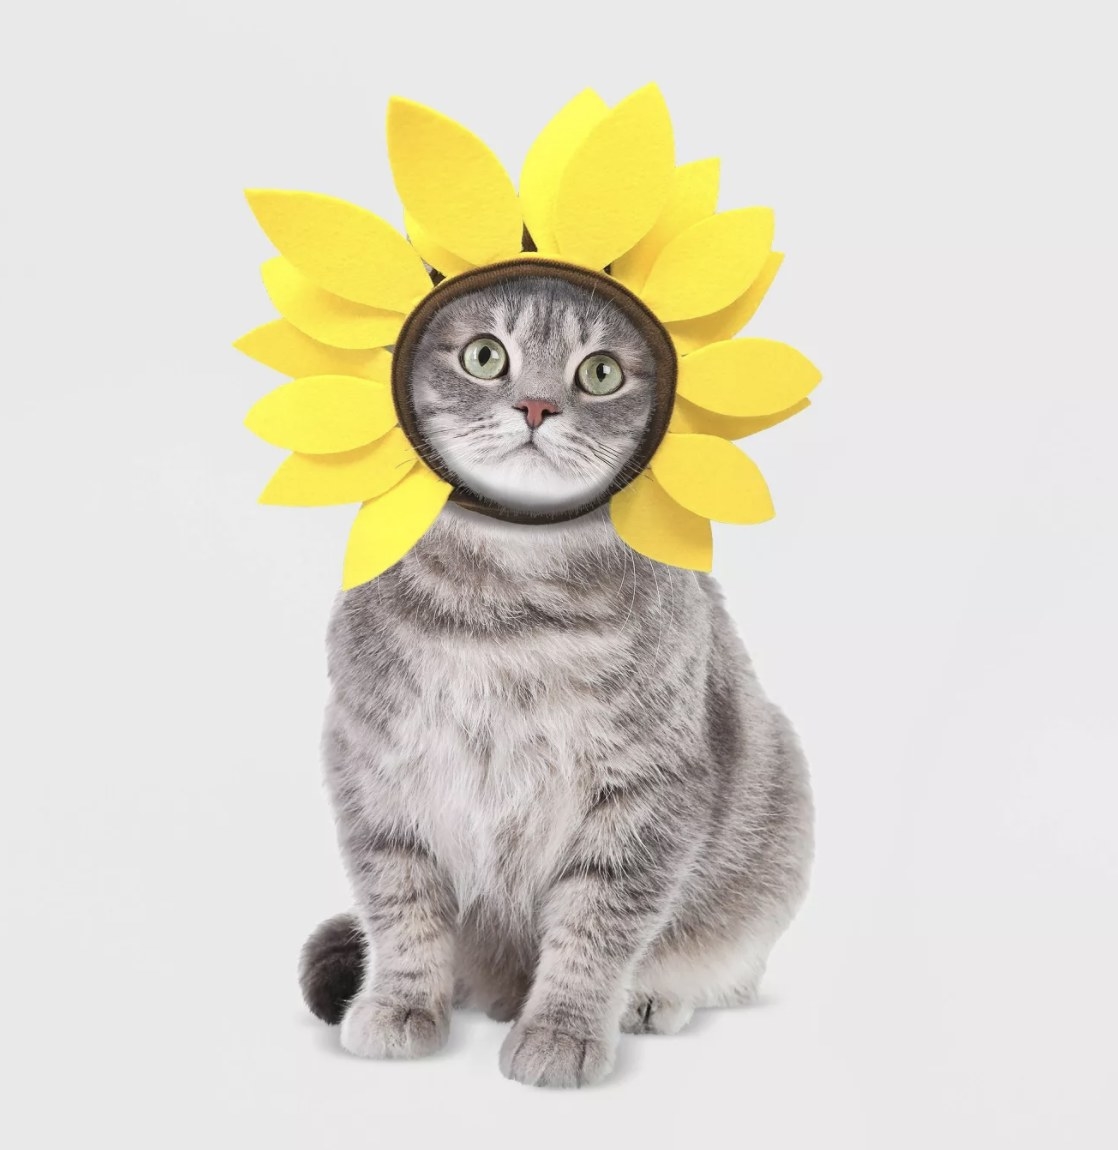 A grey cat is wearing the yellow petal headpiece with brown trim around its face